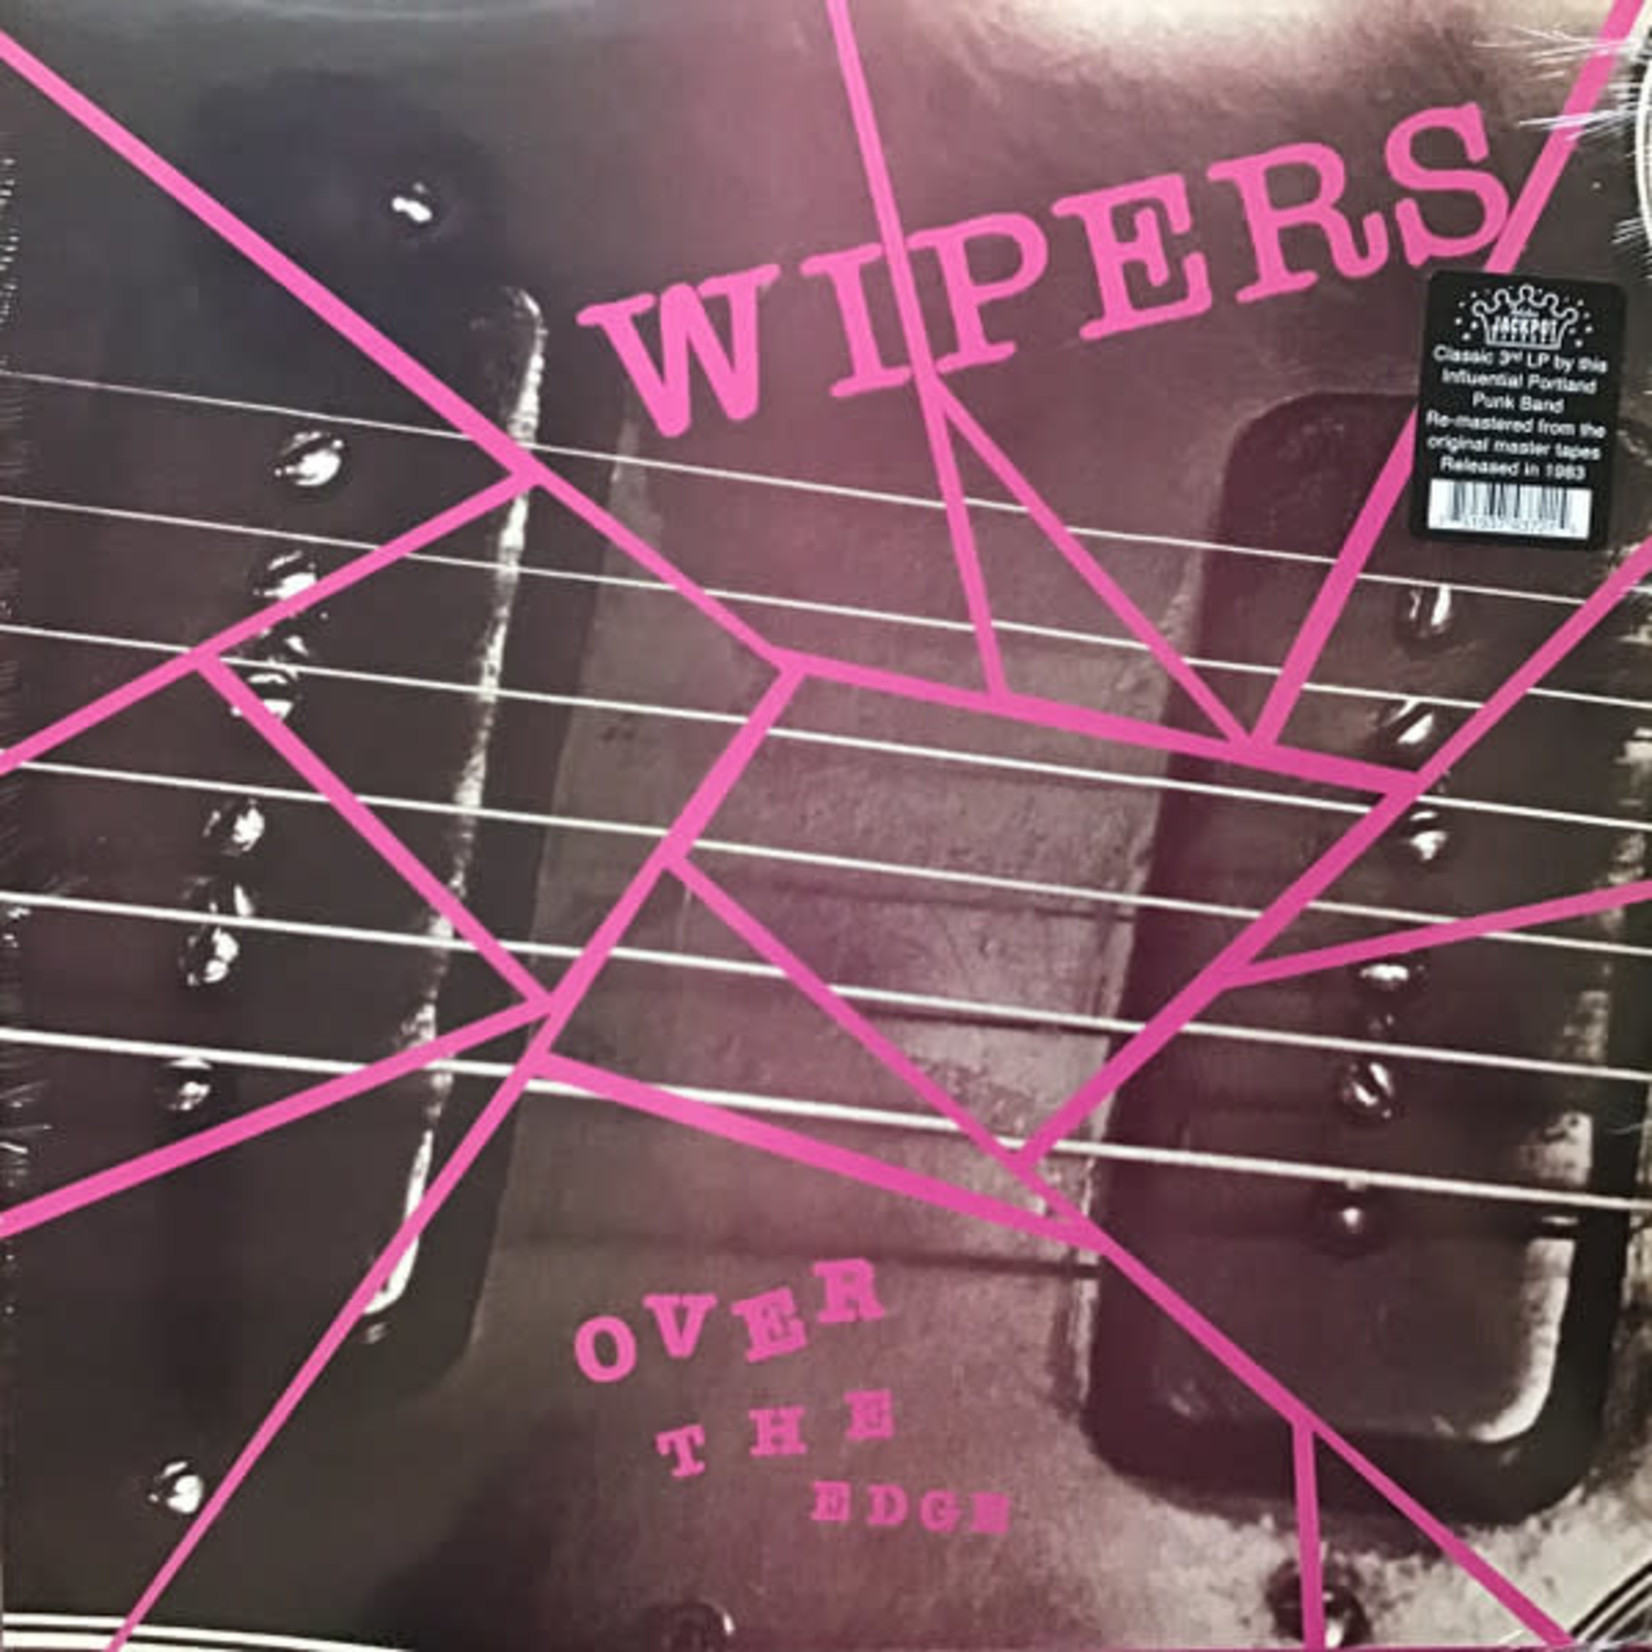 Jackpot Wipers - Over The Edge (LP)